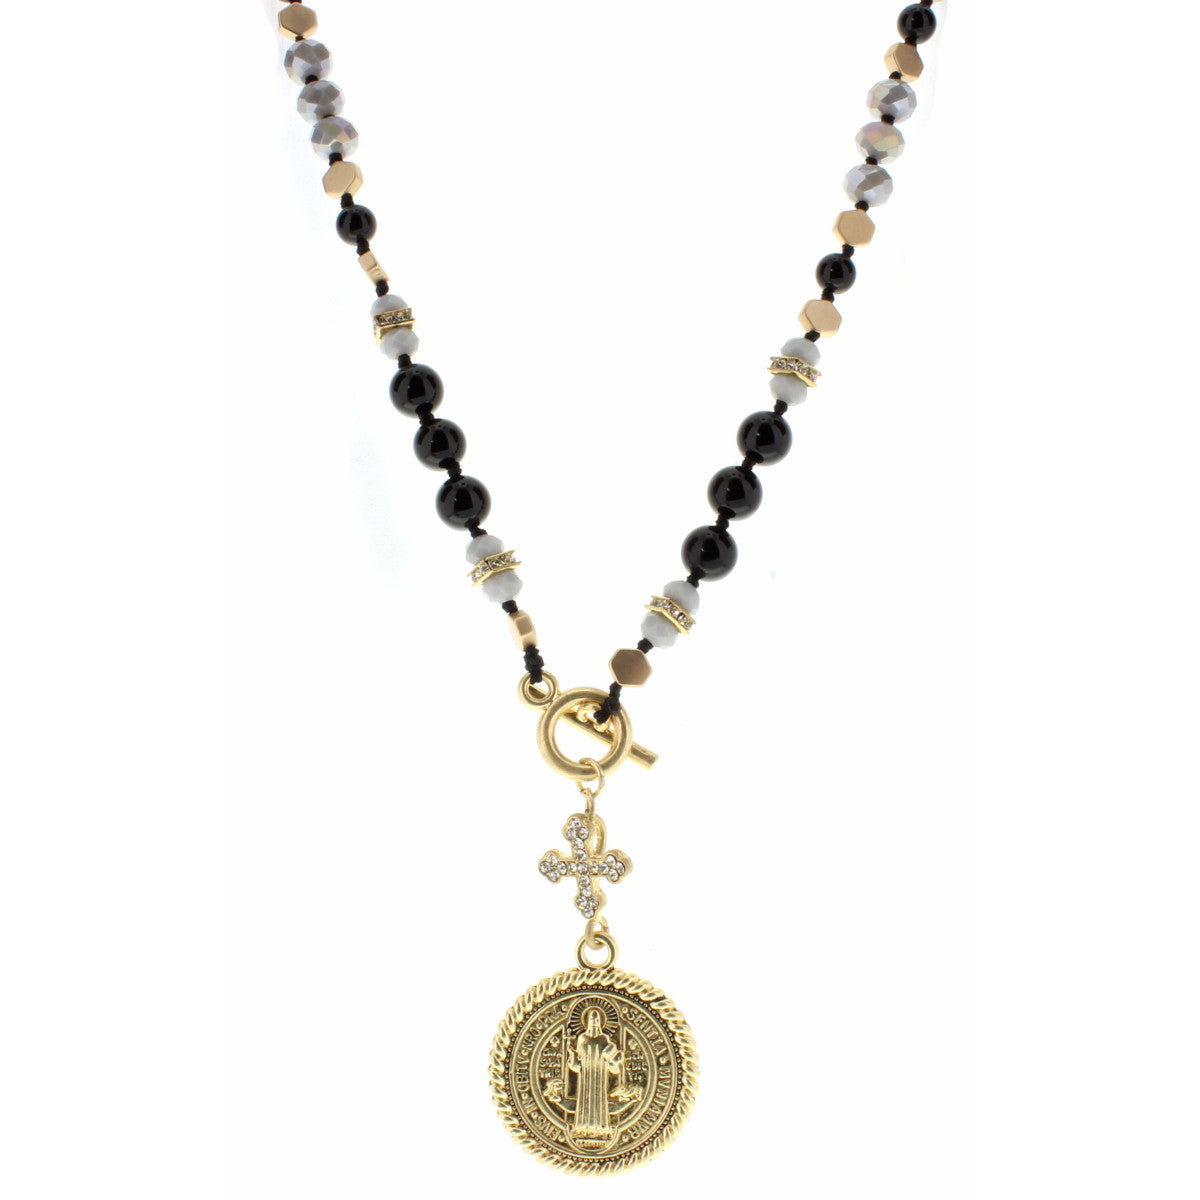 30" Jet, Grey, and Gold Beaded with Rhinestone Cross and Medallion Necklace